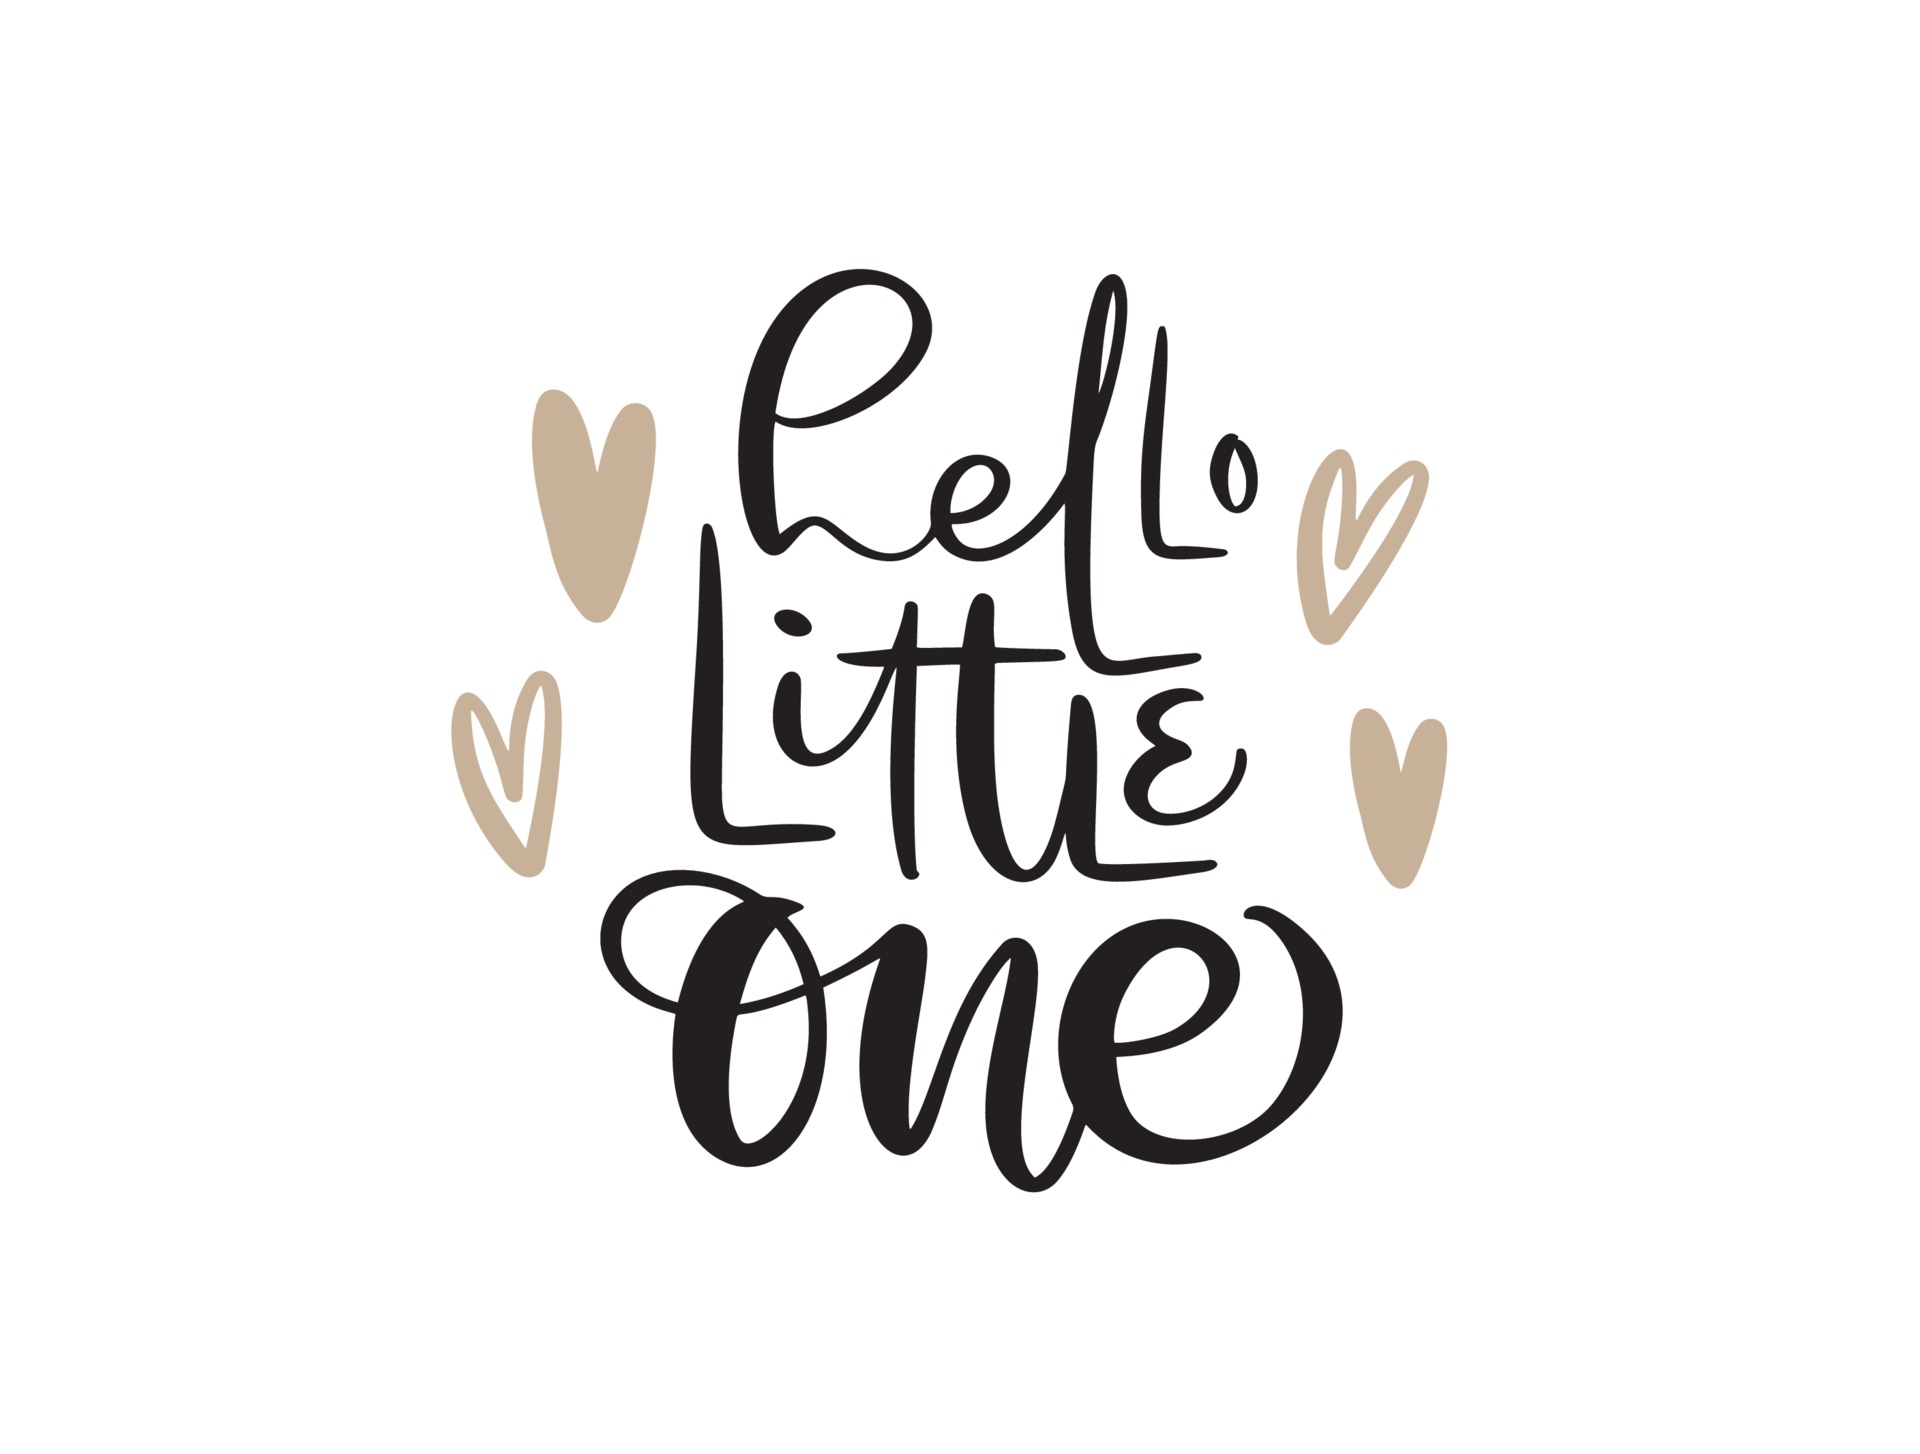 https://static.vecteezy.com/system/resources/previews/002/044/184/original/hello-baby-handwritten-calligraphy-lettering-text-kids-hand-drawn-lettering-quote-illustration-for-children-greeting-card-t-shirt-banner-and-poster-vector.jpg